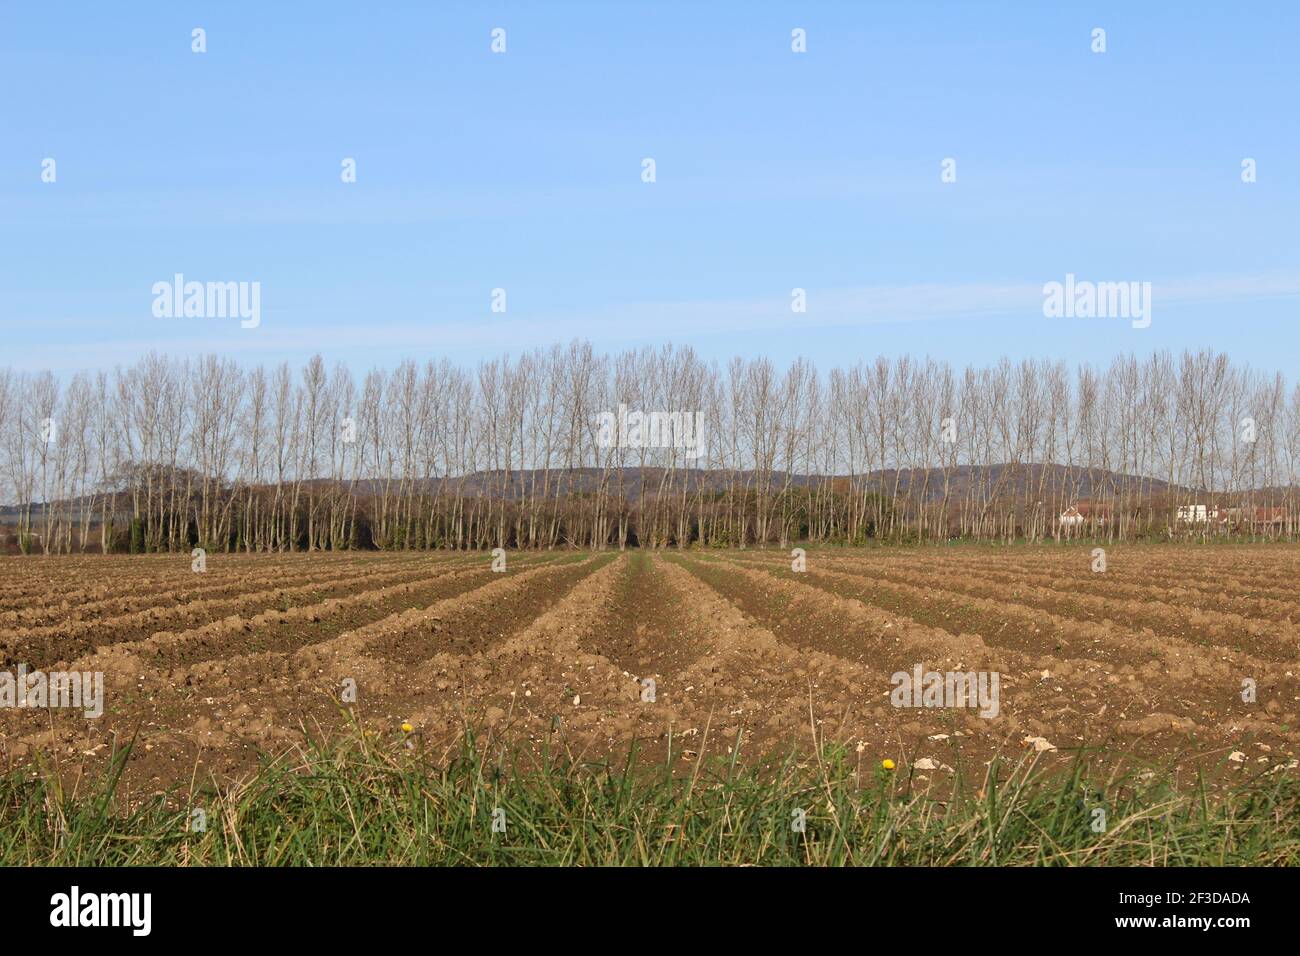 Row of Poplar trees behind a ploughed farmer's field. Hills of the South Downs can be seen in distance. Blue sky copy space to just add text. Stock Photo